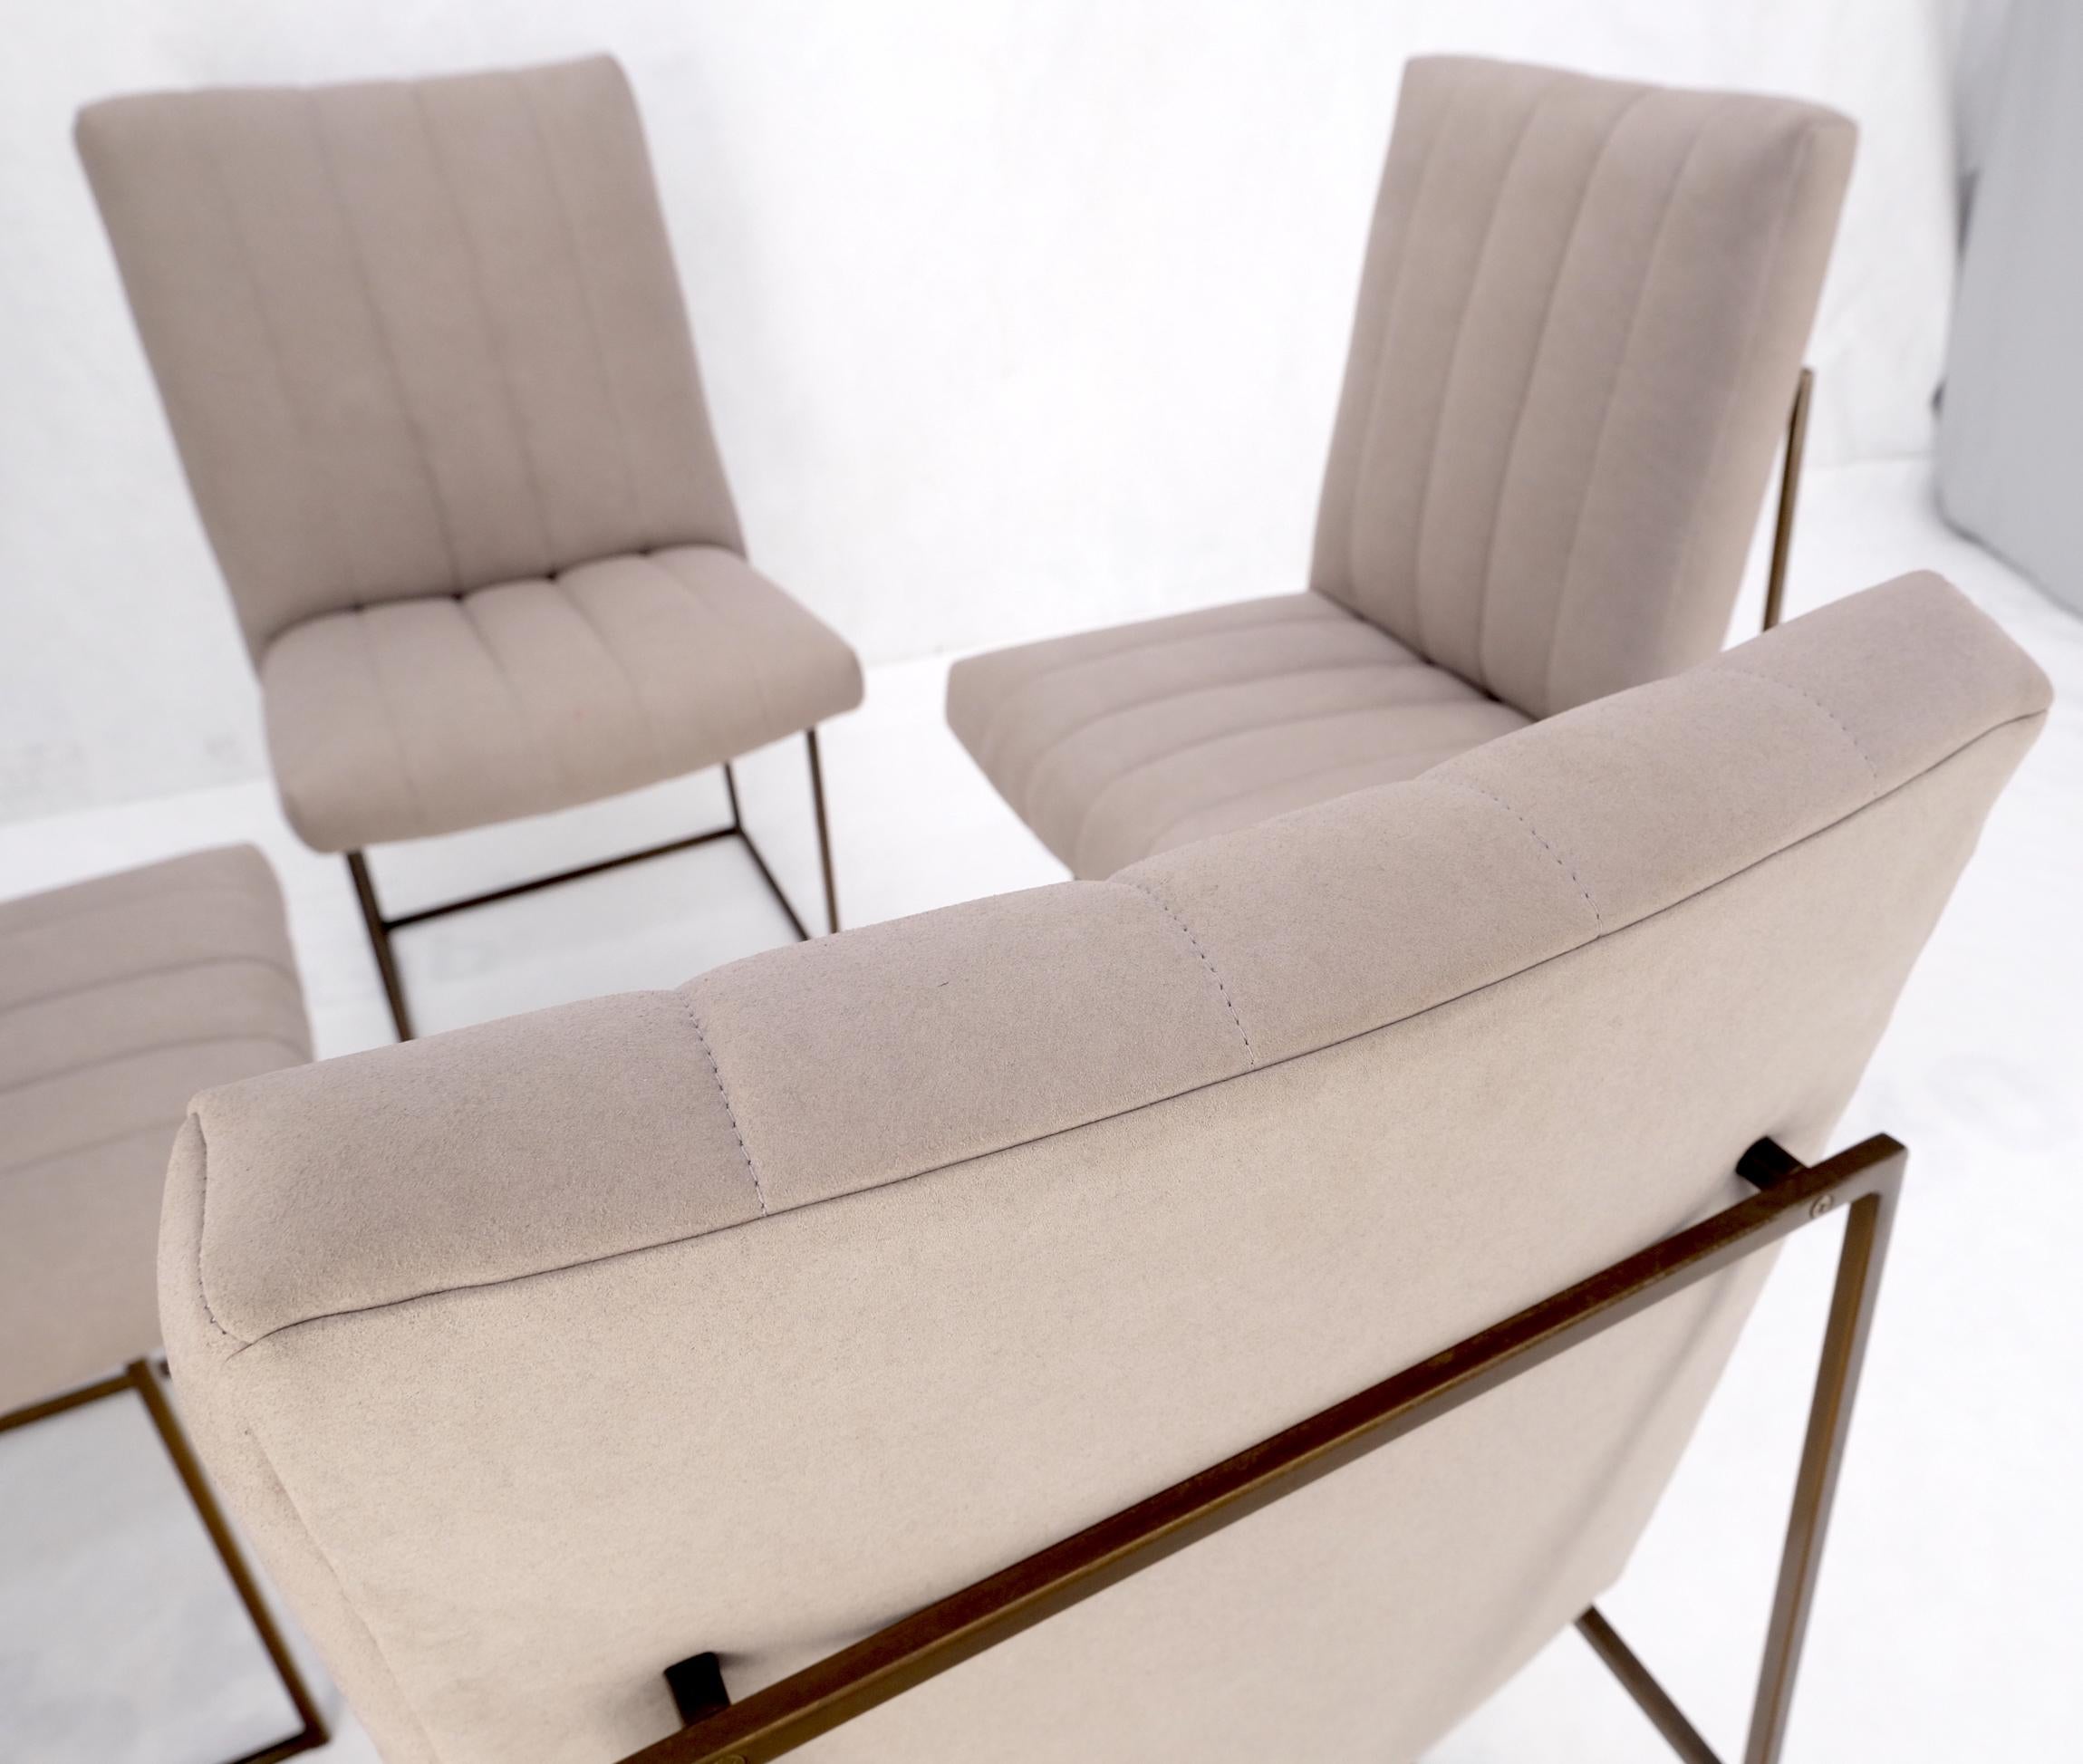 Set of 4 Milo Baughman Mid-Century Modern Dining Chairs New Alcantera Upholstery For Sale 8